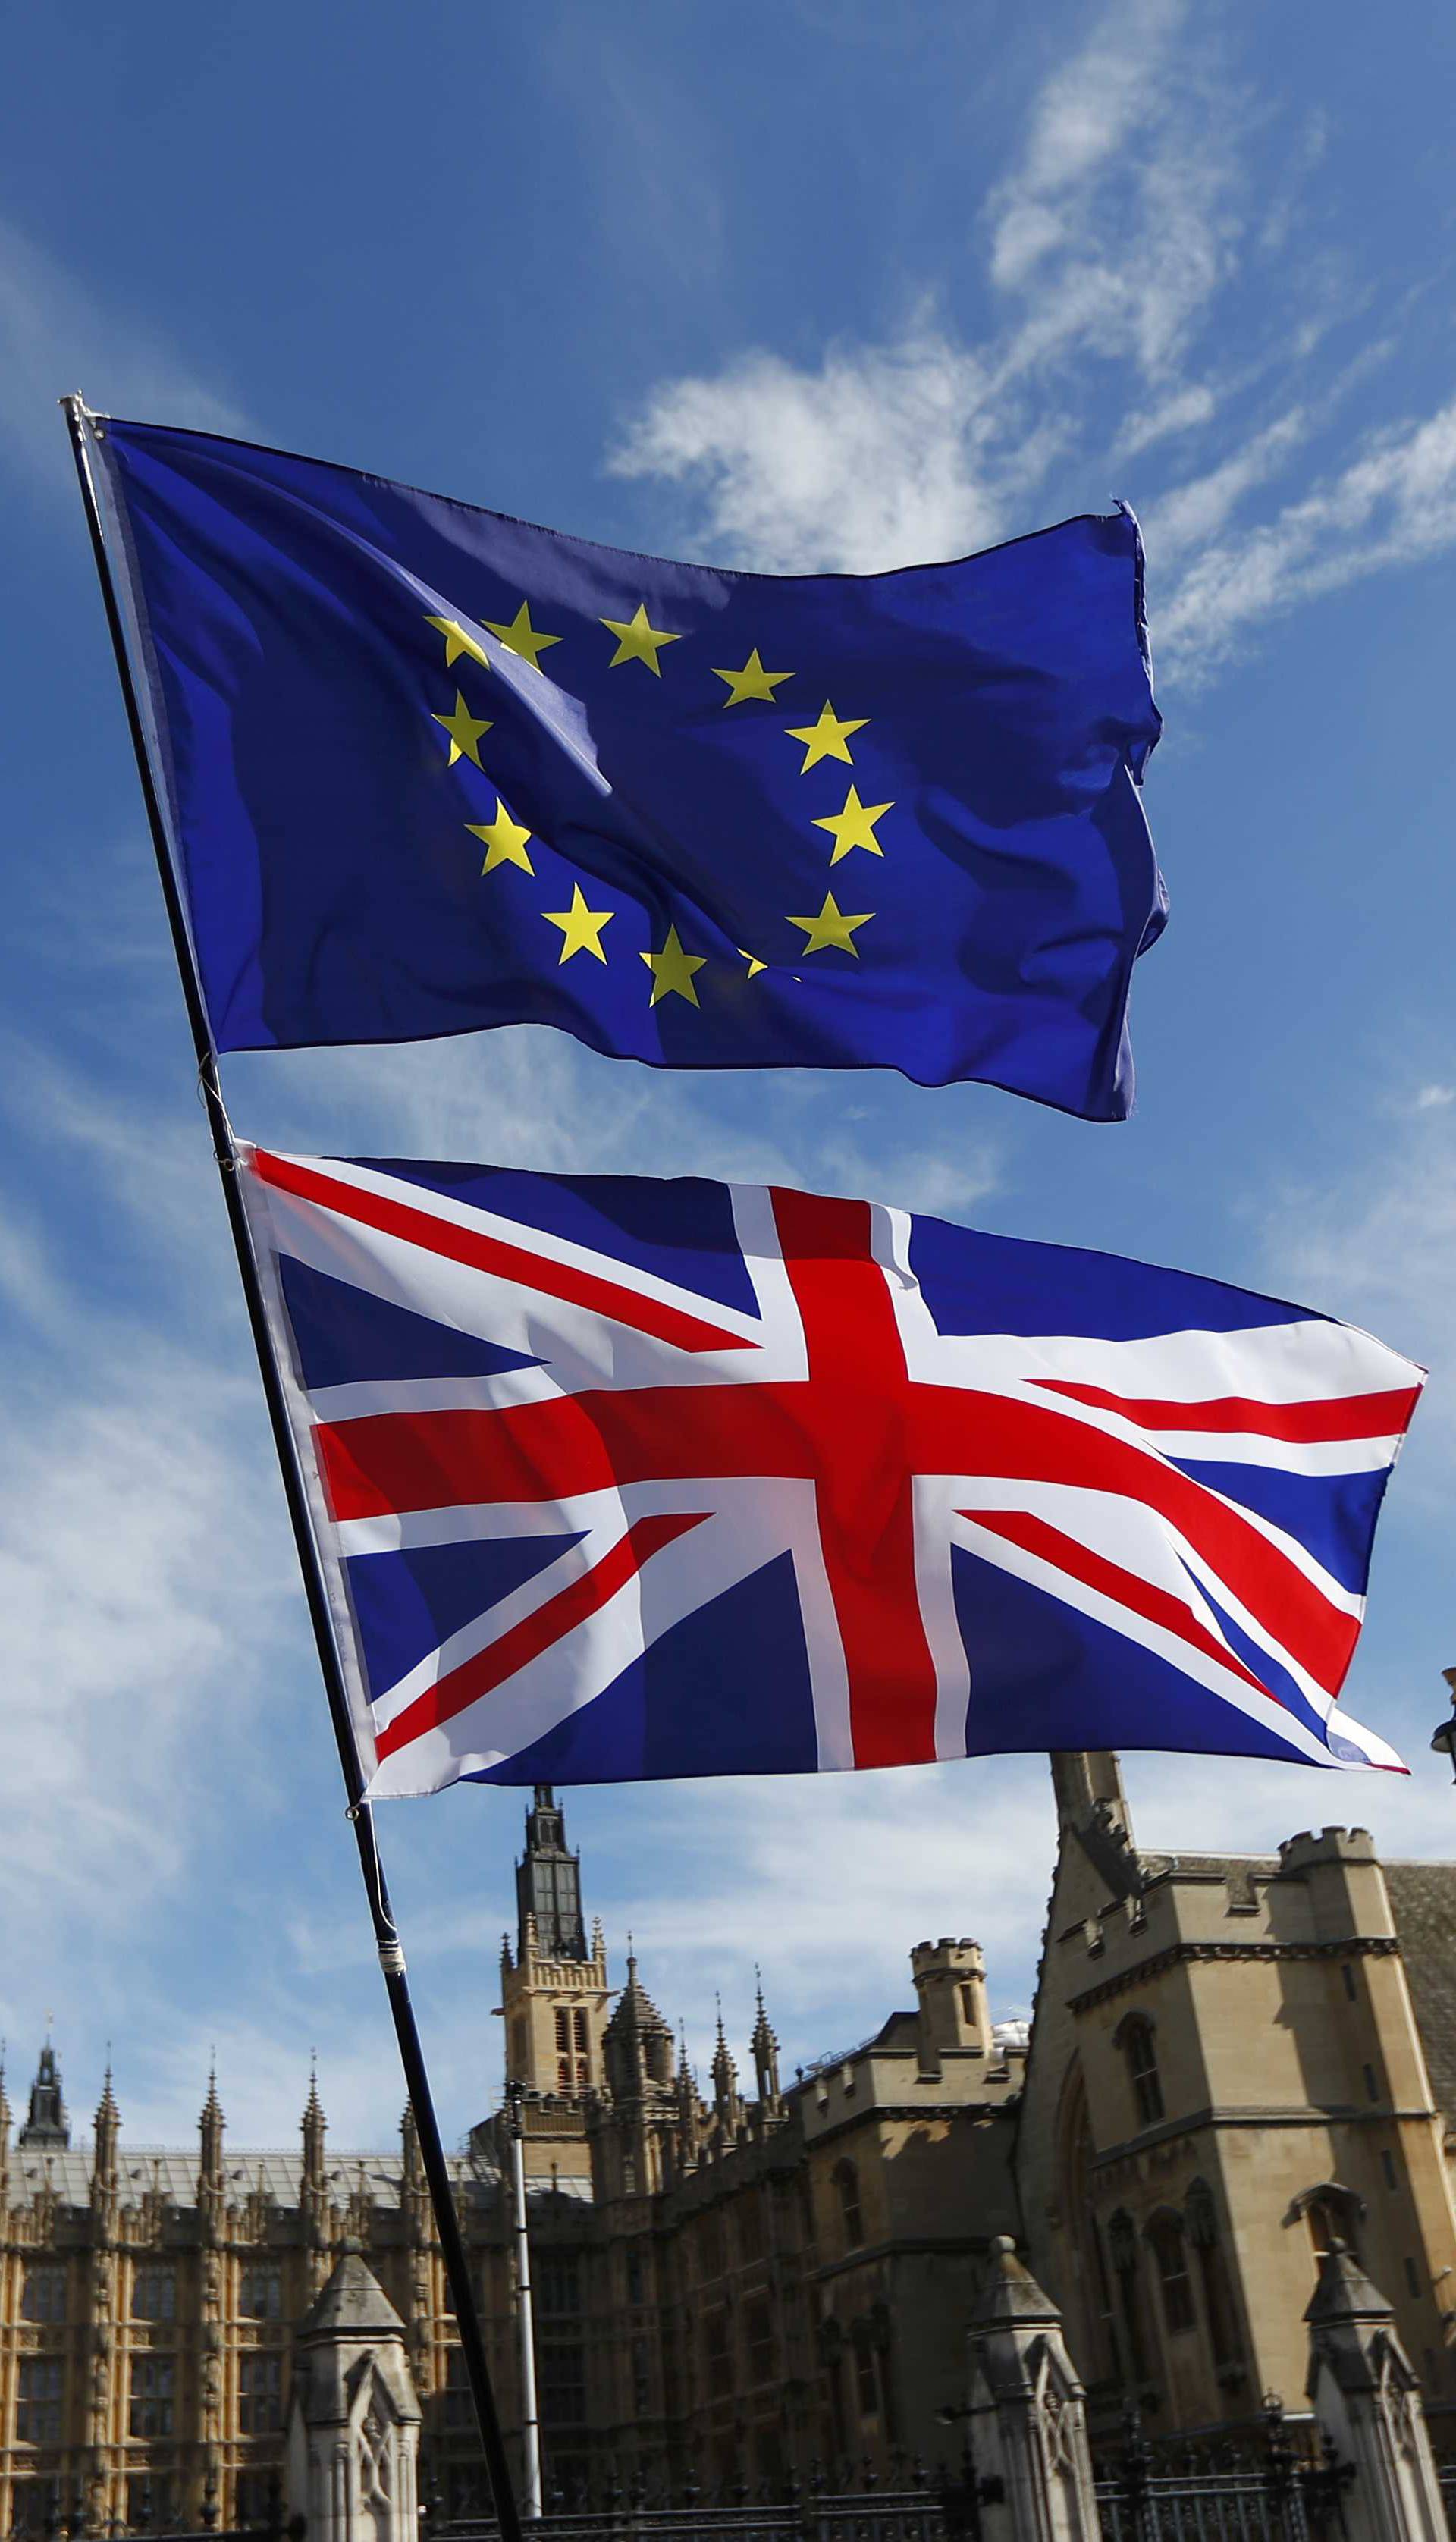 EU and Union flags fly above Parliament Square during a Unite for Europe march, in central London